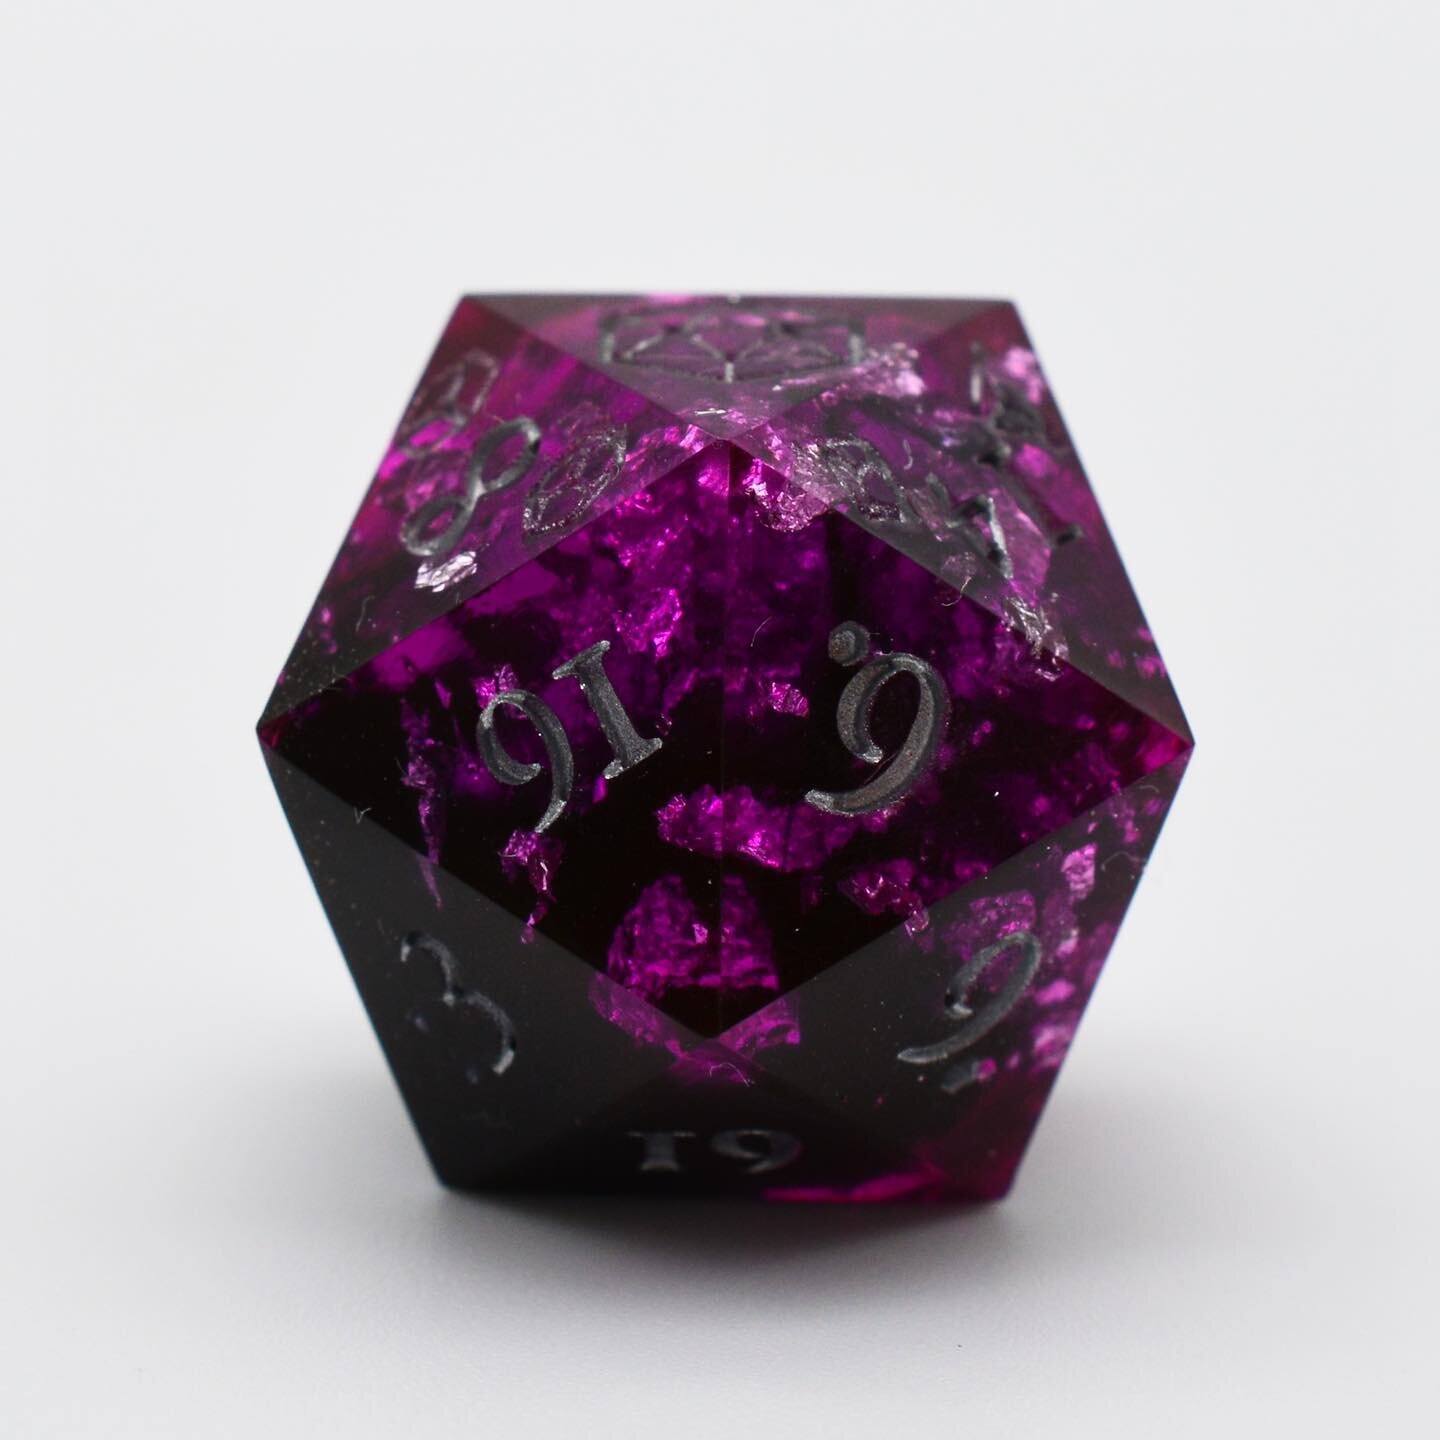 Some lovely single d20s that are still available for sale in the shop: Hex, Candied Rose prototype, Sugar Rush, and Dancing with Darkness. 

Thank you all again for your support! 

#dice #handmade #diceset #resin #diceporn #handmadedice #handmadewith